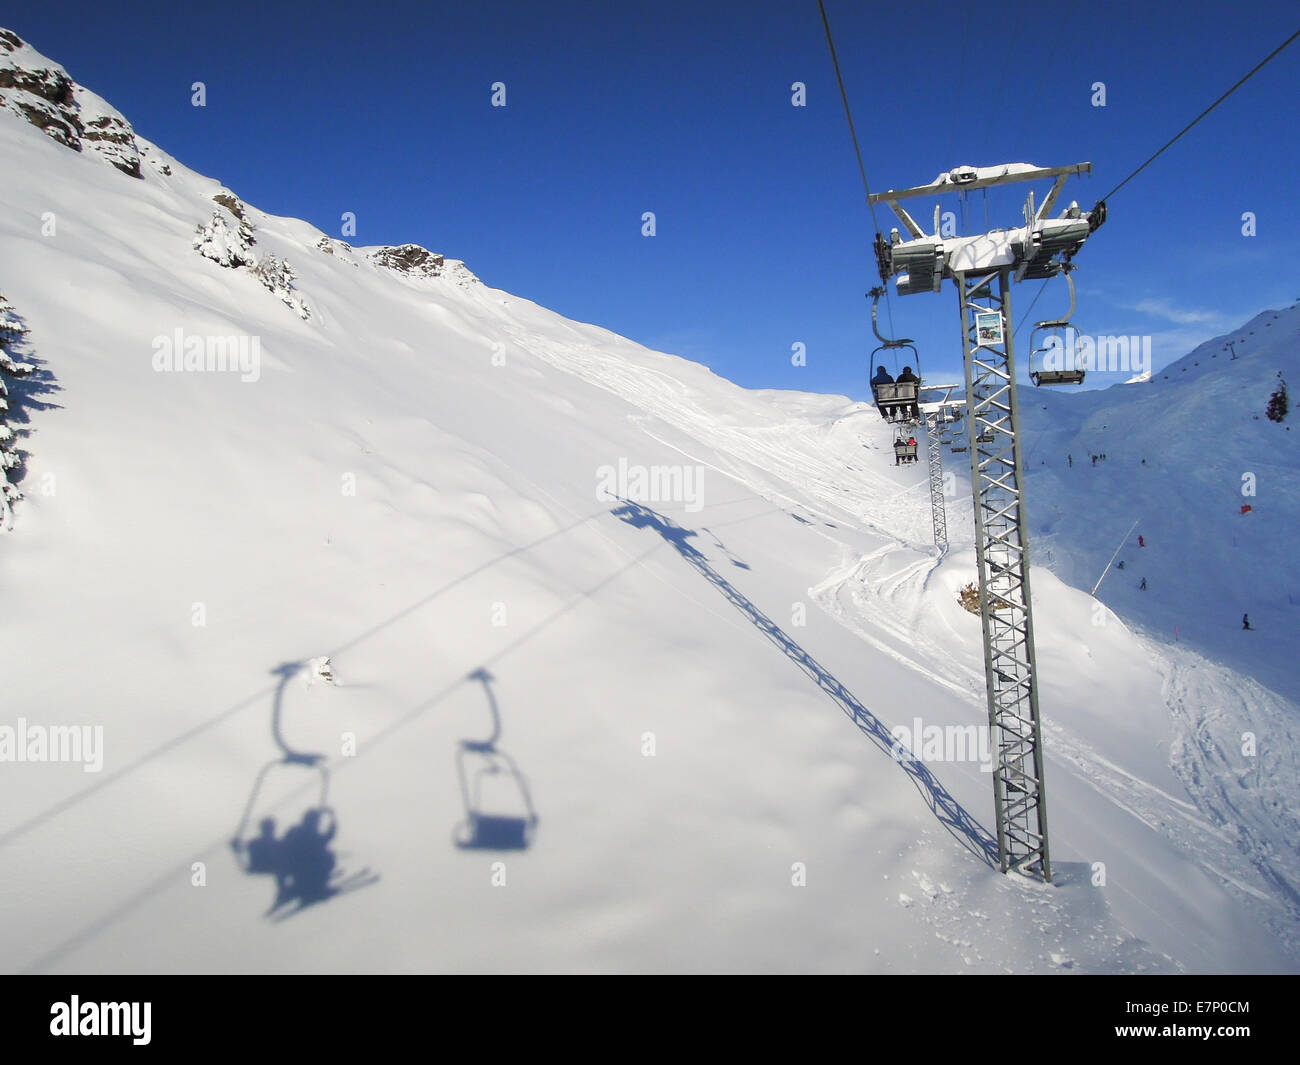 Switzerland, alpine, alps, chair lift, clear, cold, country, day, destinations, Engelberg, equipment, Europe, hill, holiday, ice Stock Photo